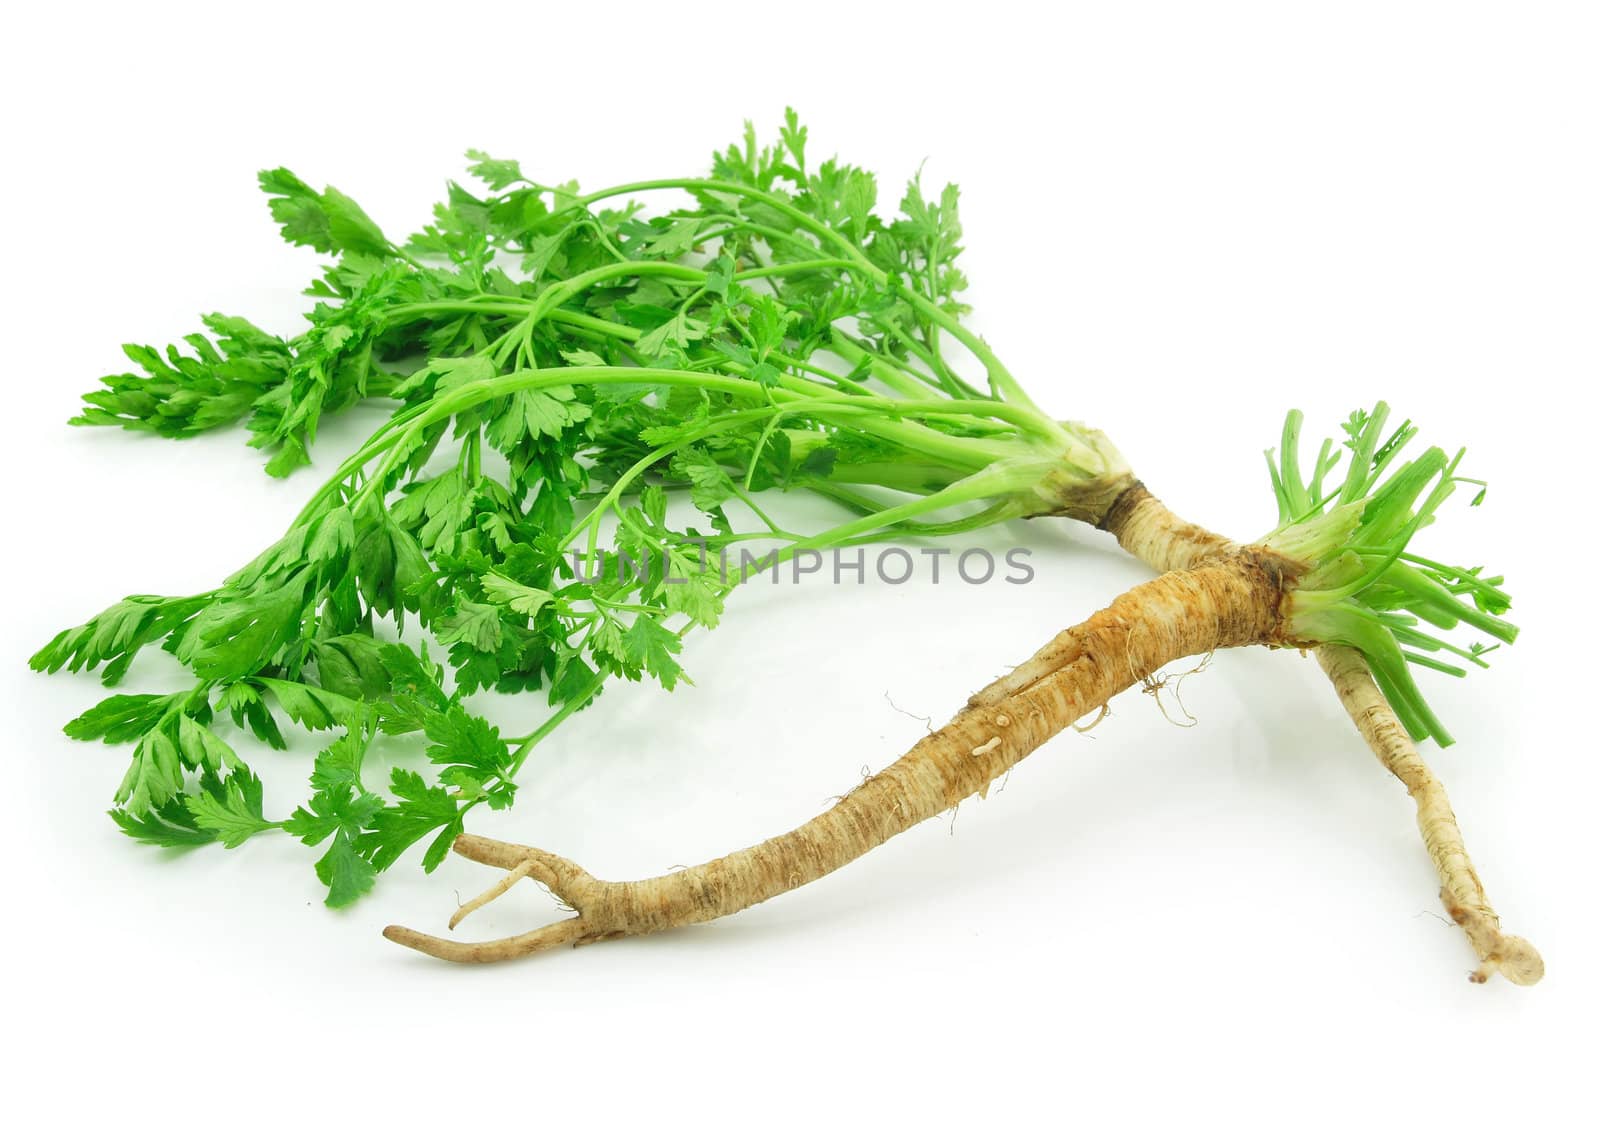 Ripe Green Parsley Isolated on White by alphacell